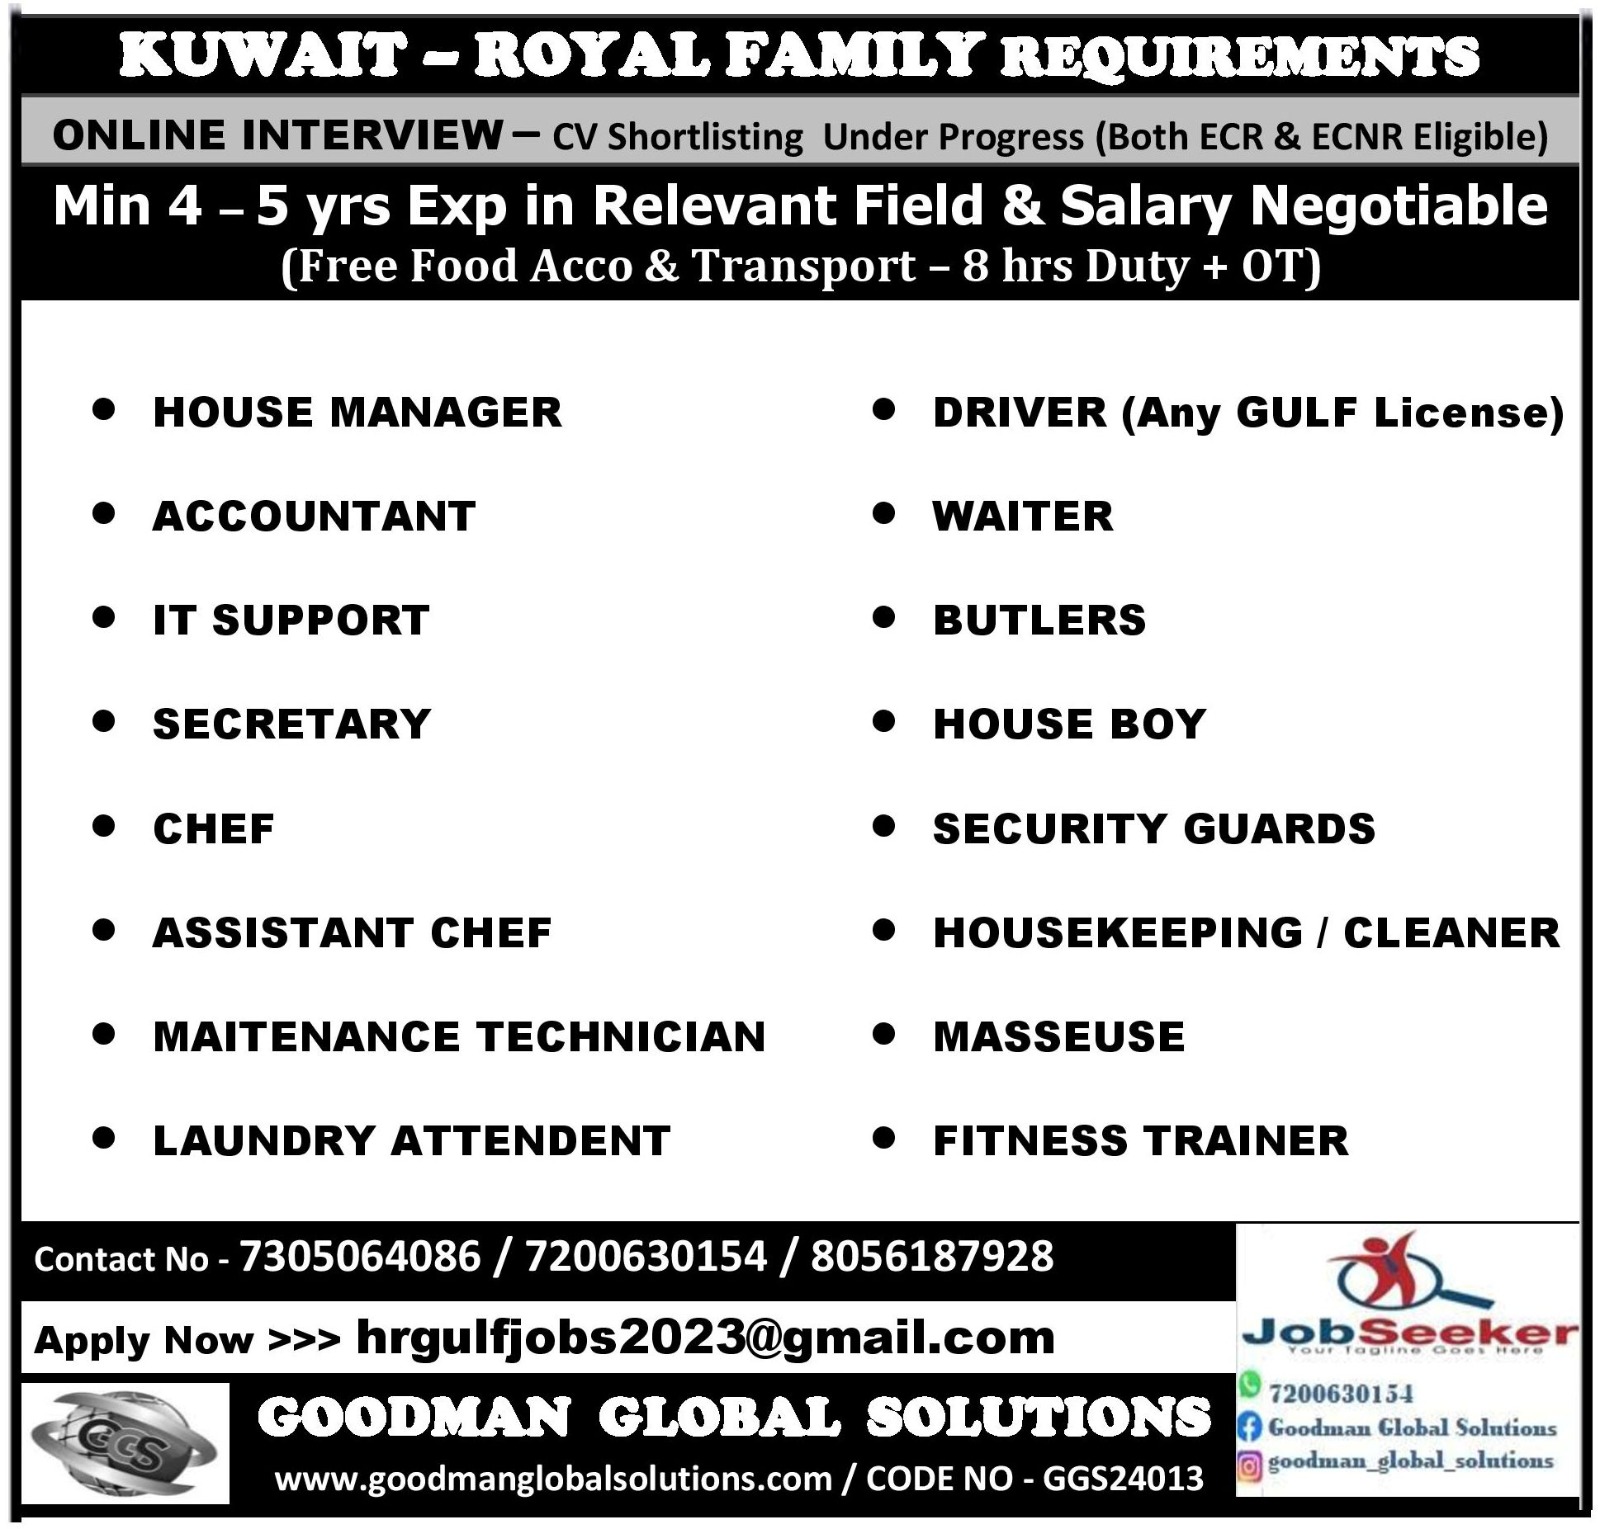 KUWAIT – ROYAL FAMILY REQUIREMENTS